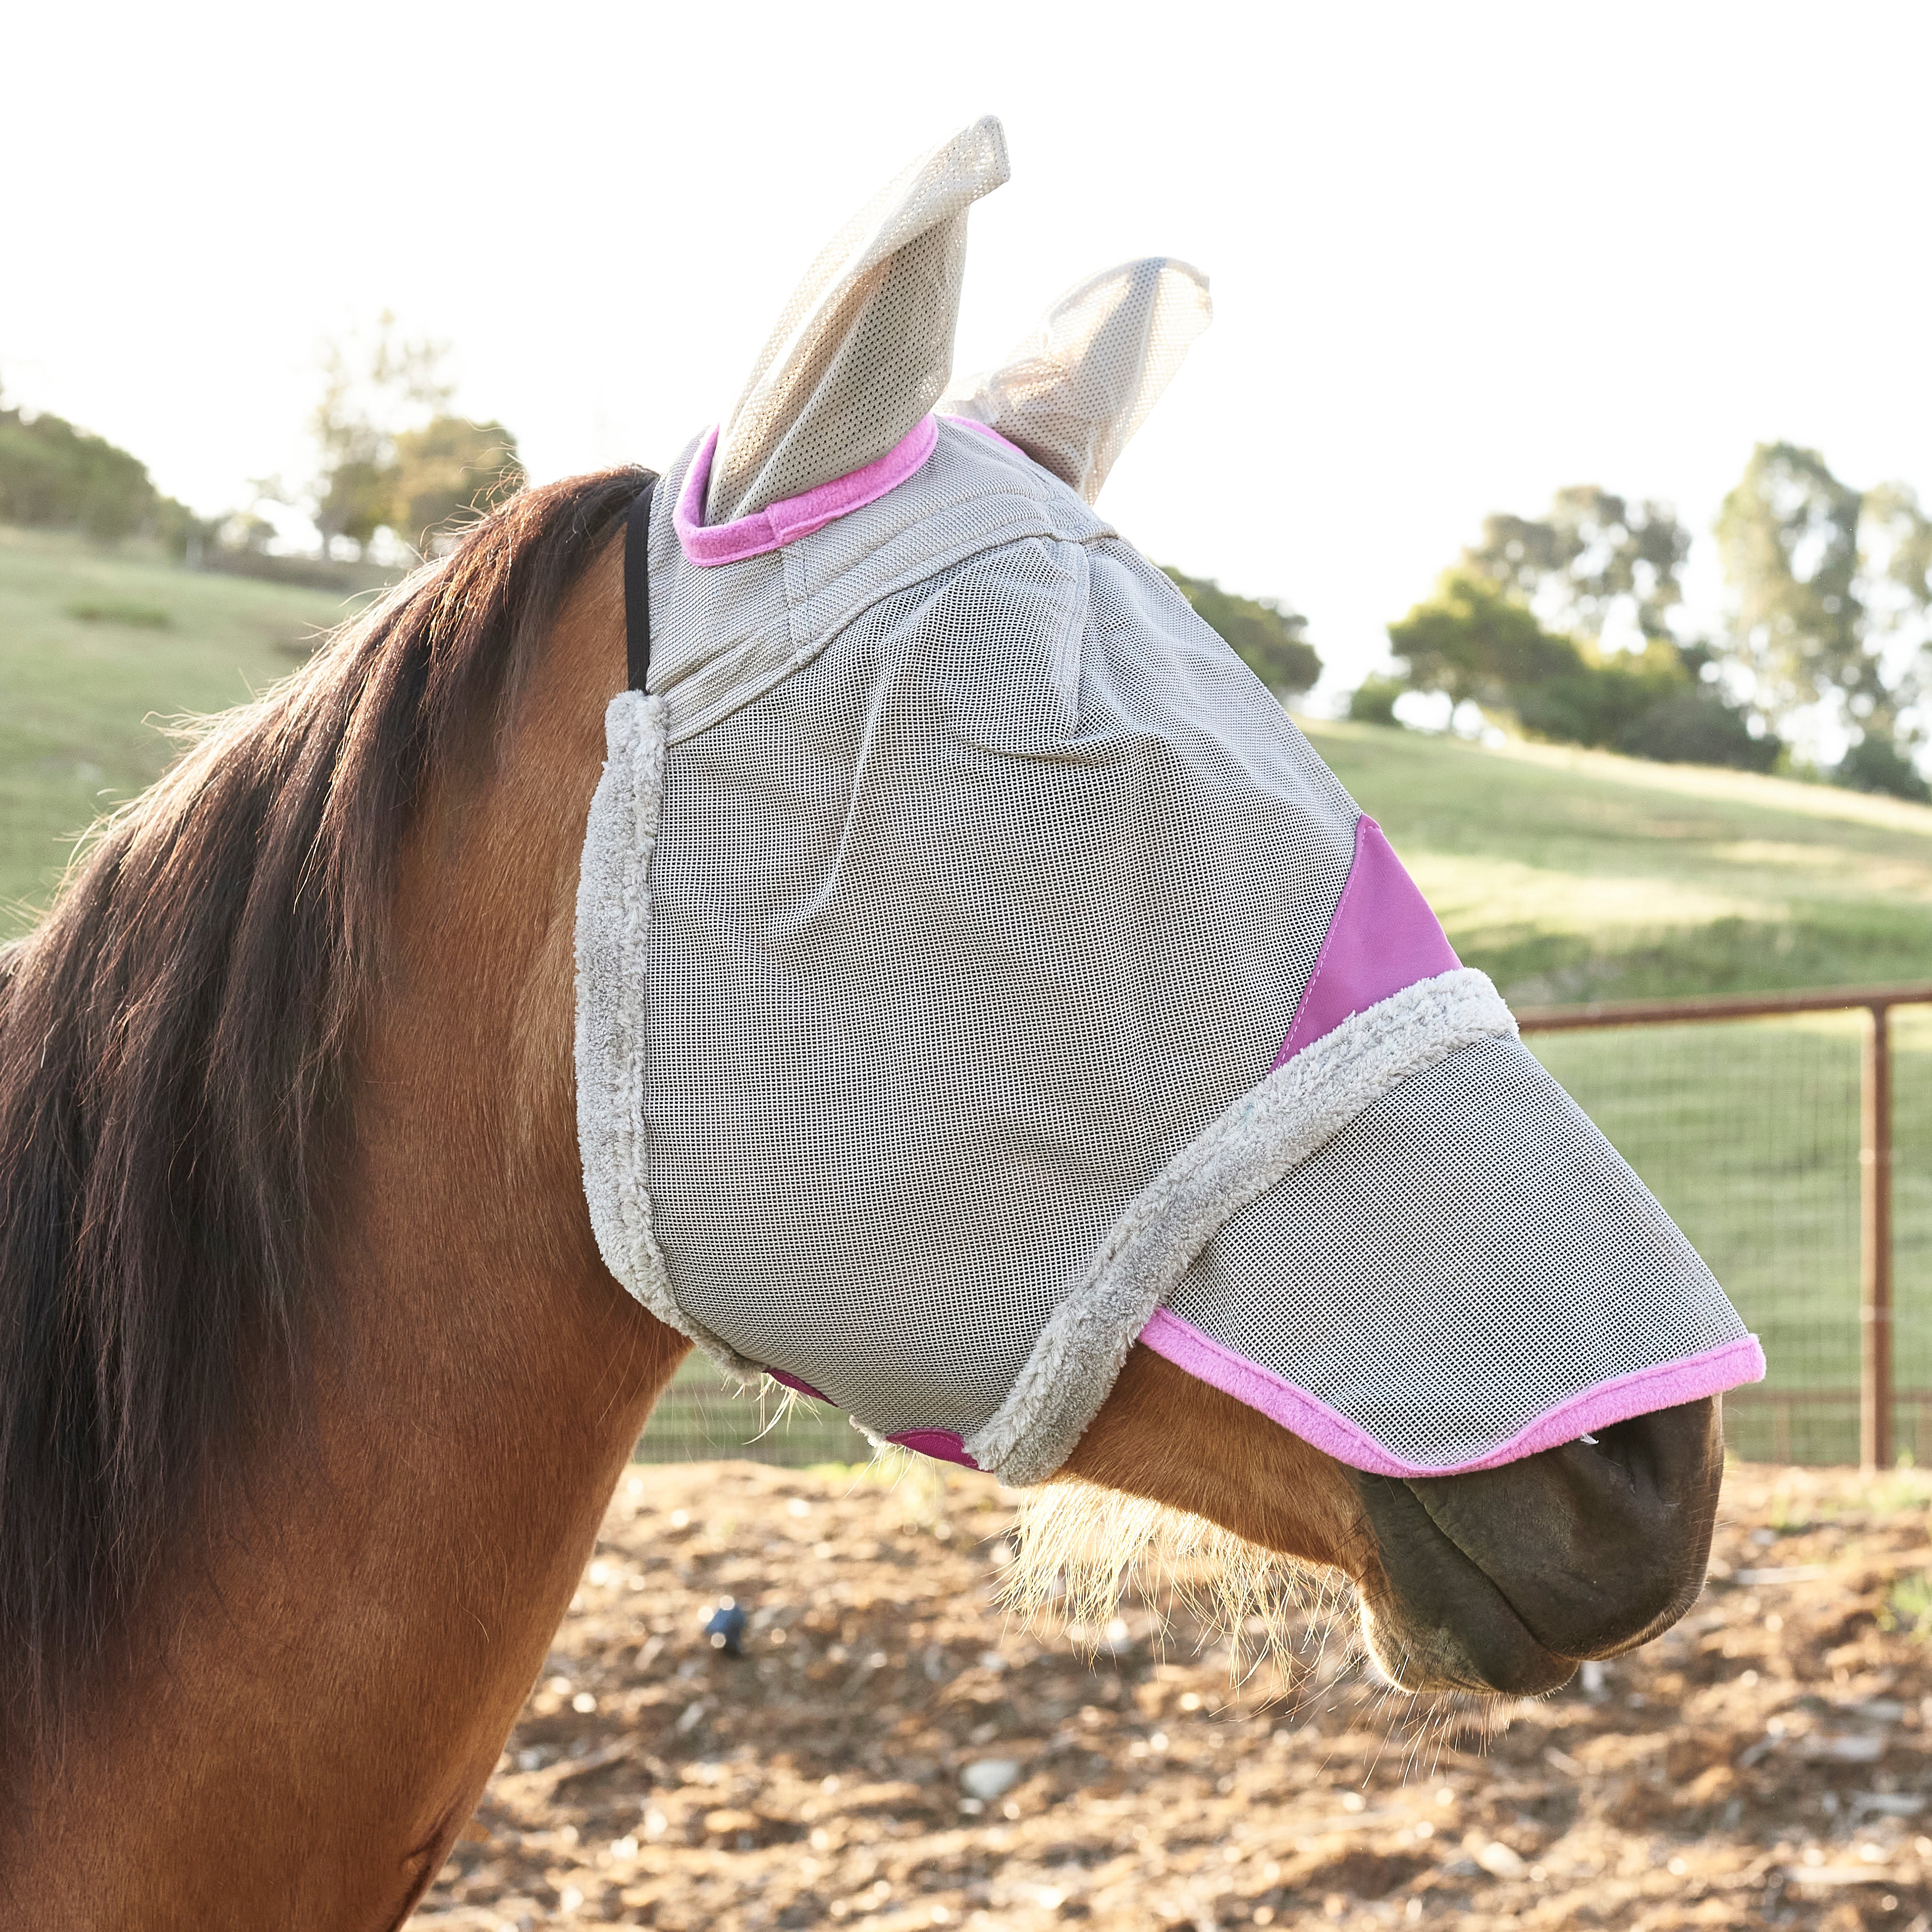 Non Heat Transferring fertgo Fly Mask for Horses with All-Round Breathable Mesh 